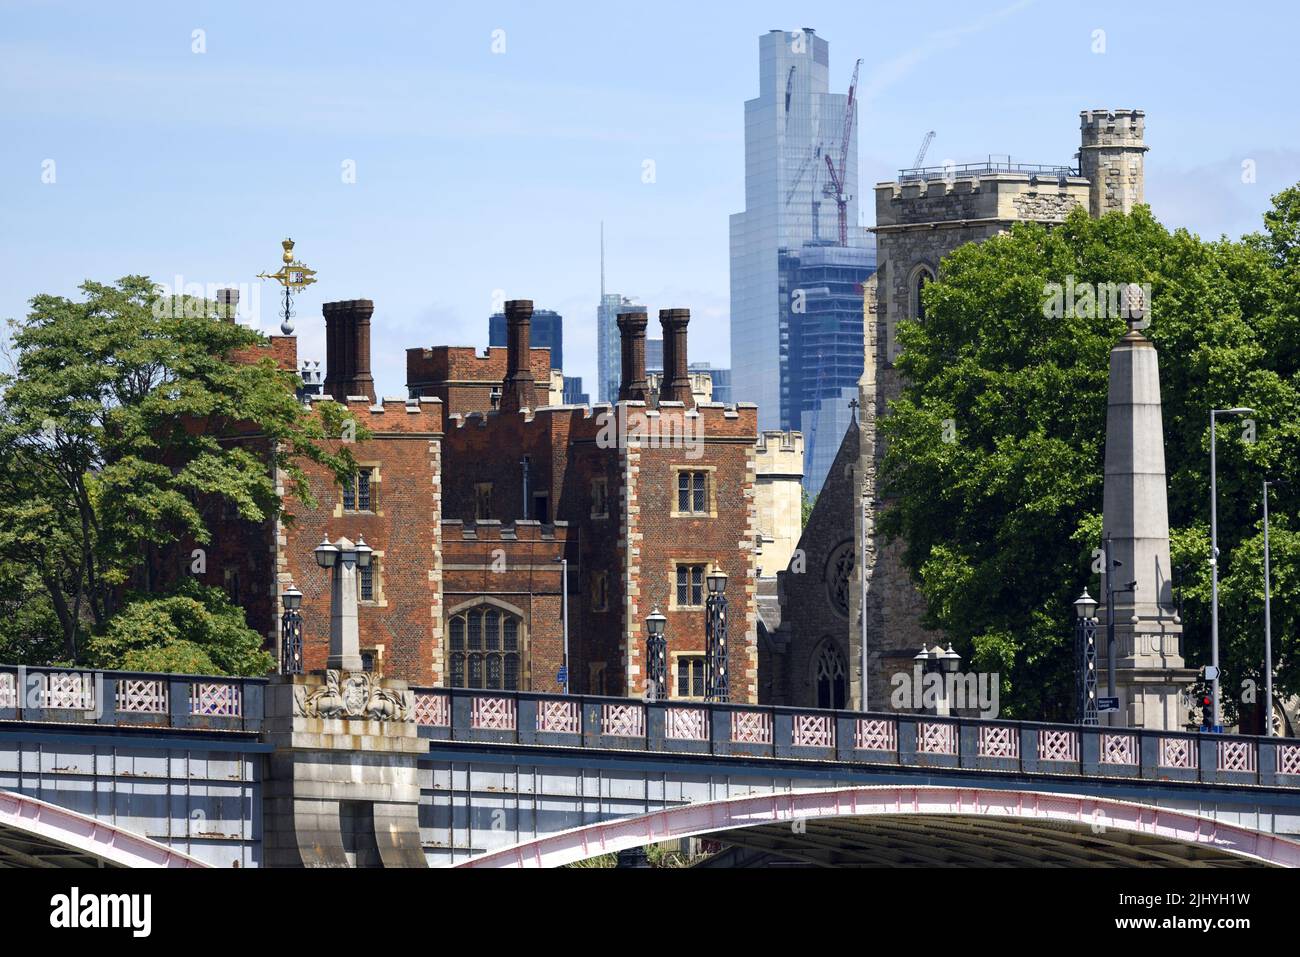 London, England, UK. Lambeth Palace, Lambeth Bridge and the NatWest Tower / Tower 42 seen from Millbank Stock Photo